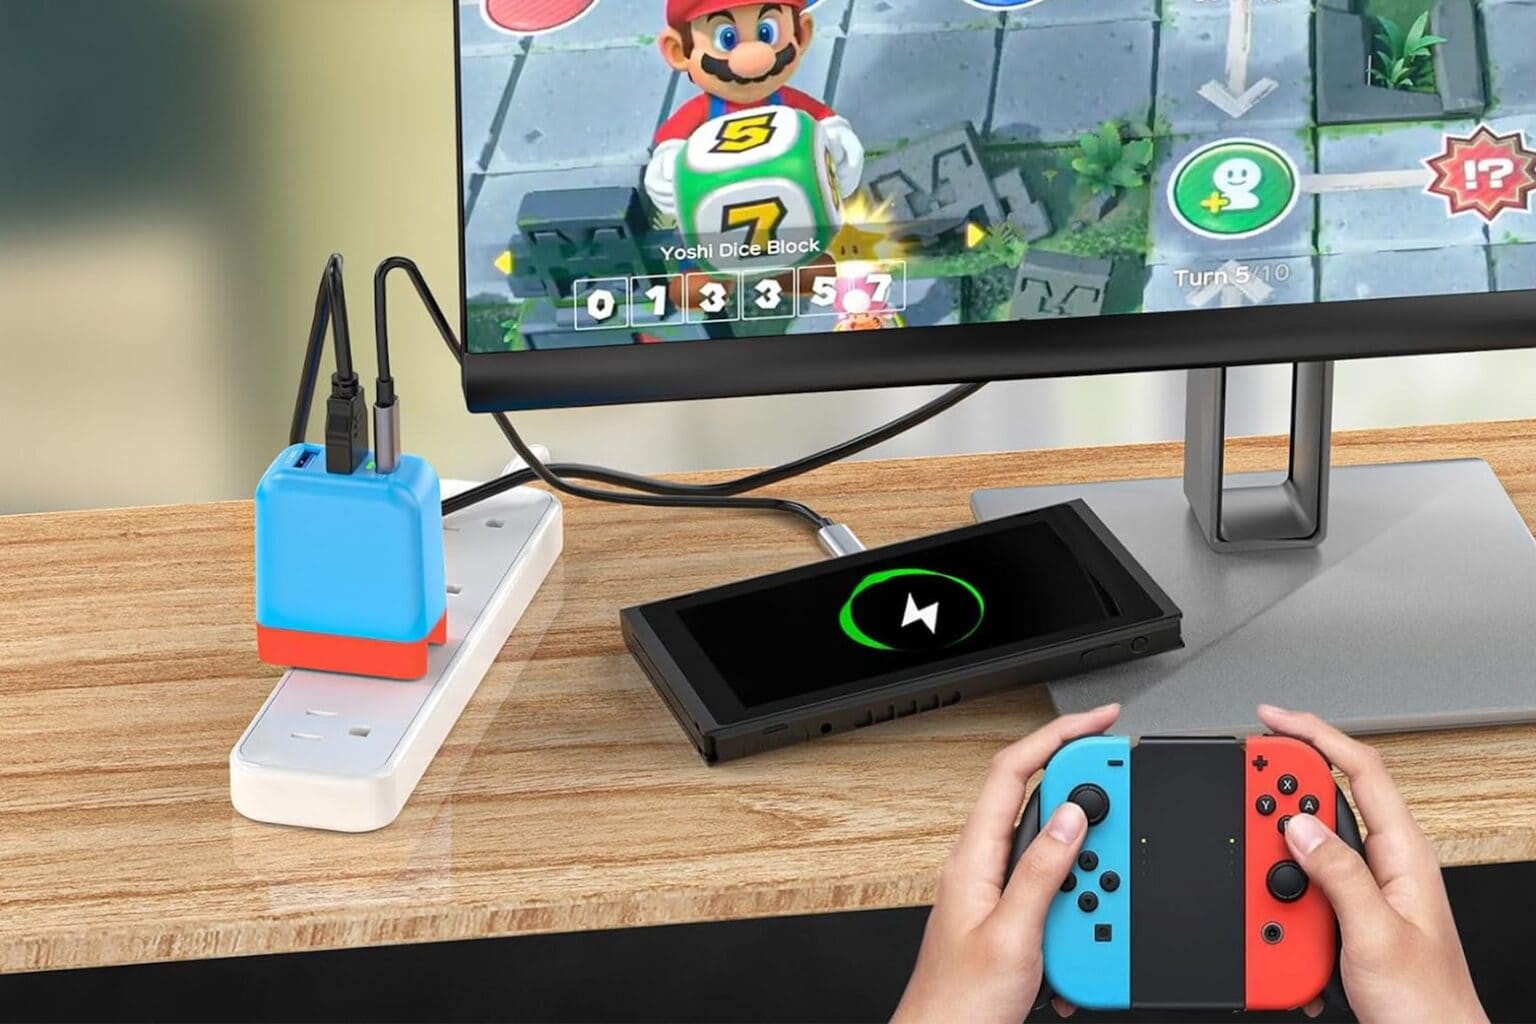 3-in-1 Nintendo Switch dock and charger.